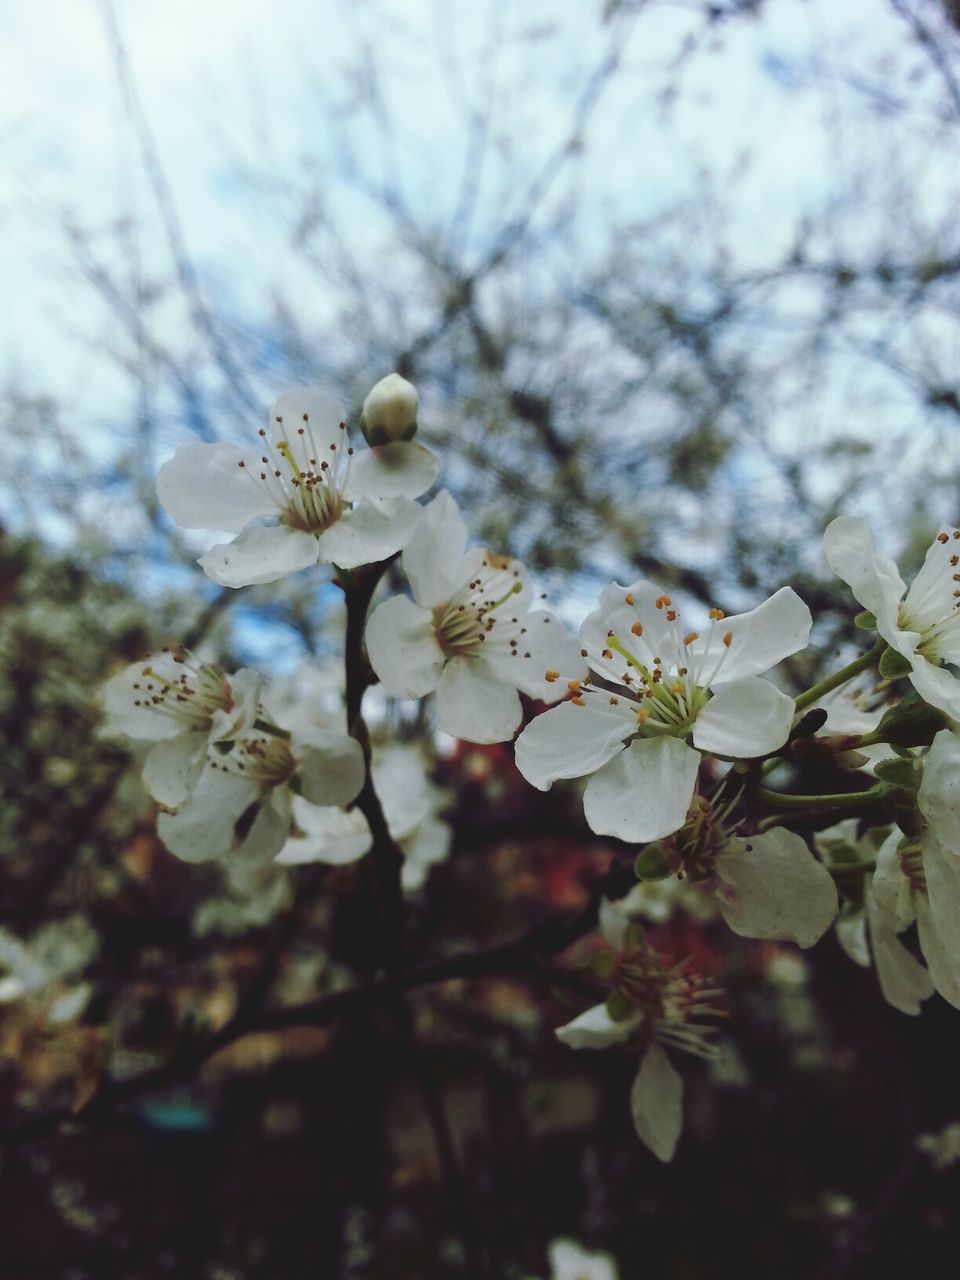 flower, growth, freshness, fragility, branch, white color, nature, beauty in nature, tree, petal, blossom, low angle view, focus on foreground, close-up, in bloom, flower head, blooming, springtime, cherry blossom, day